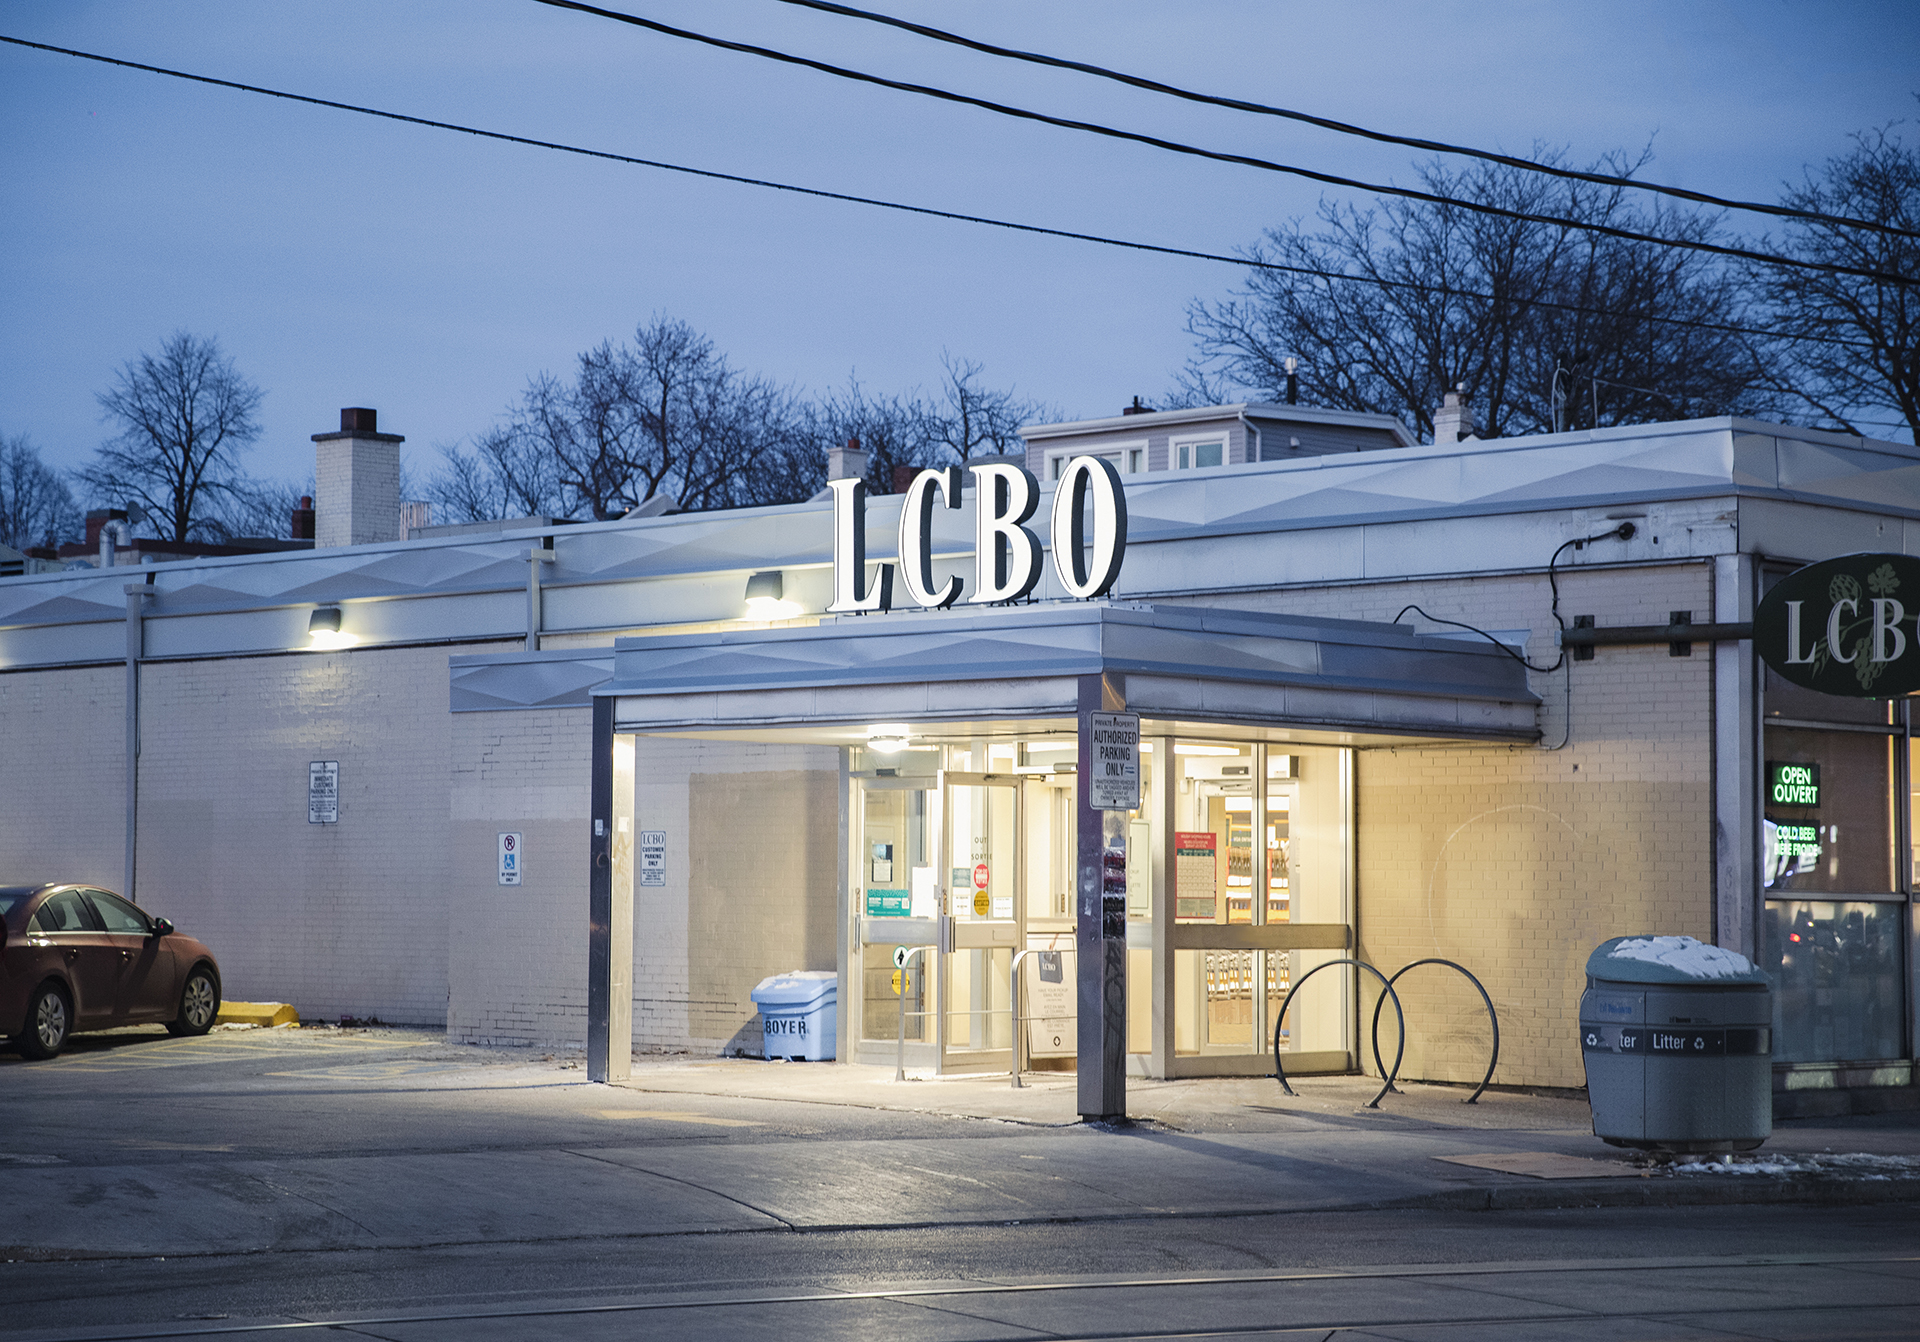 An all-white LCBO building photographed from across the street. The sun has started to set and there is little daylight left, so the light from the store and the LCBO sign makes it seem like it's glowing. There is one red parked car on the left side of the frame, and the tops of trees are poking out from behind the LCBO.